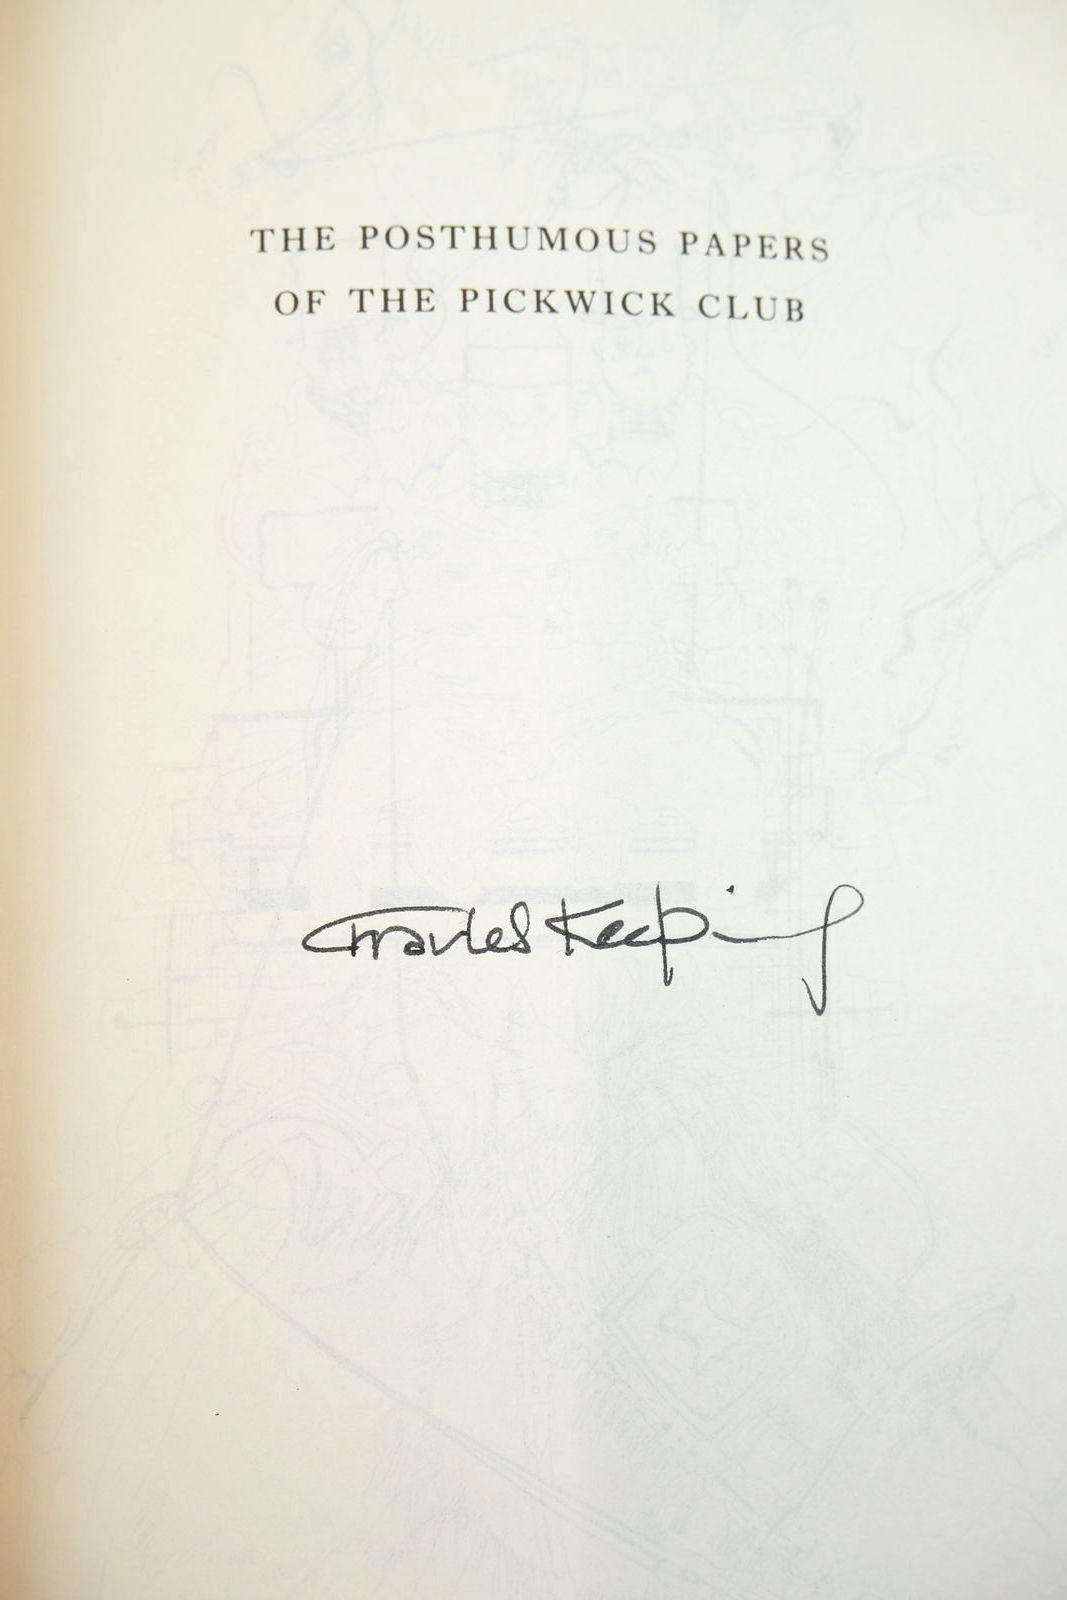 Photo of THE POSTHUMOUS PAPERS OF THE PICKWICK CLUB written by Dickens, Charles illustrated by Keeping, Charles published by Folio Society (STOCK CODE: 1320145)  for sale by Stella & Rose's Books